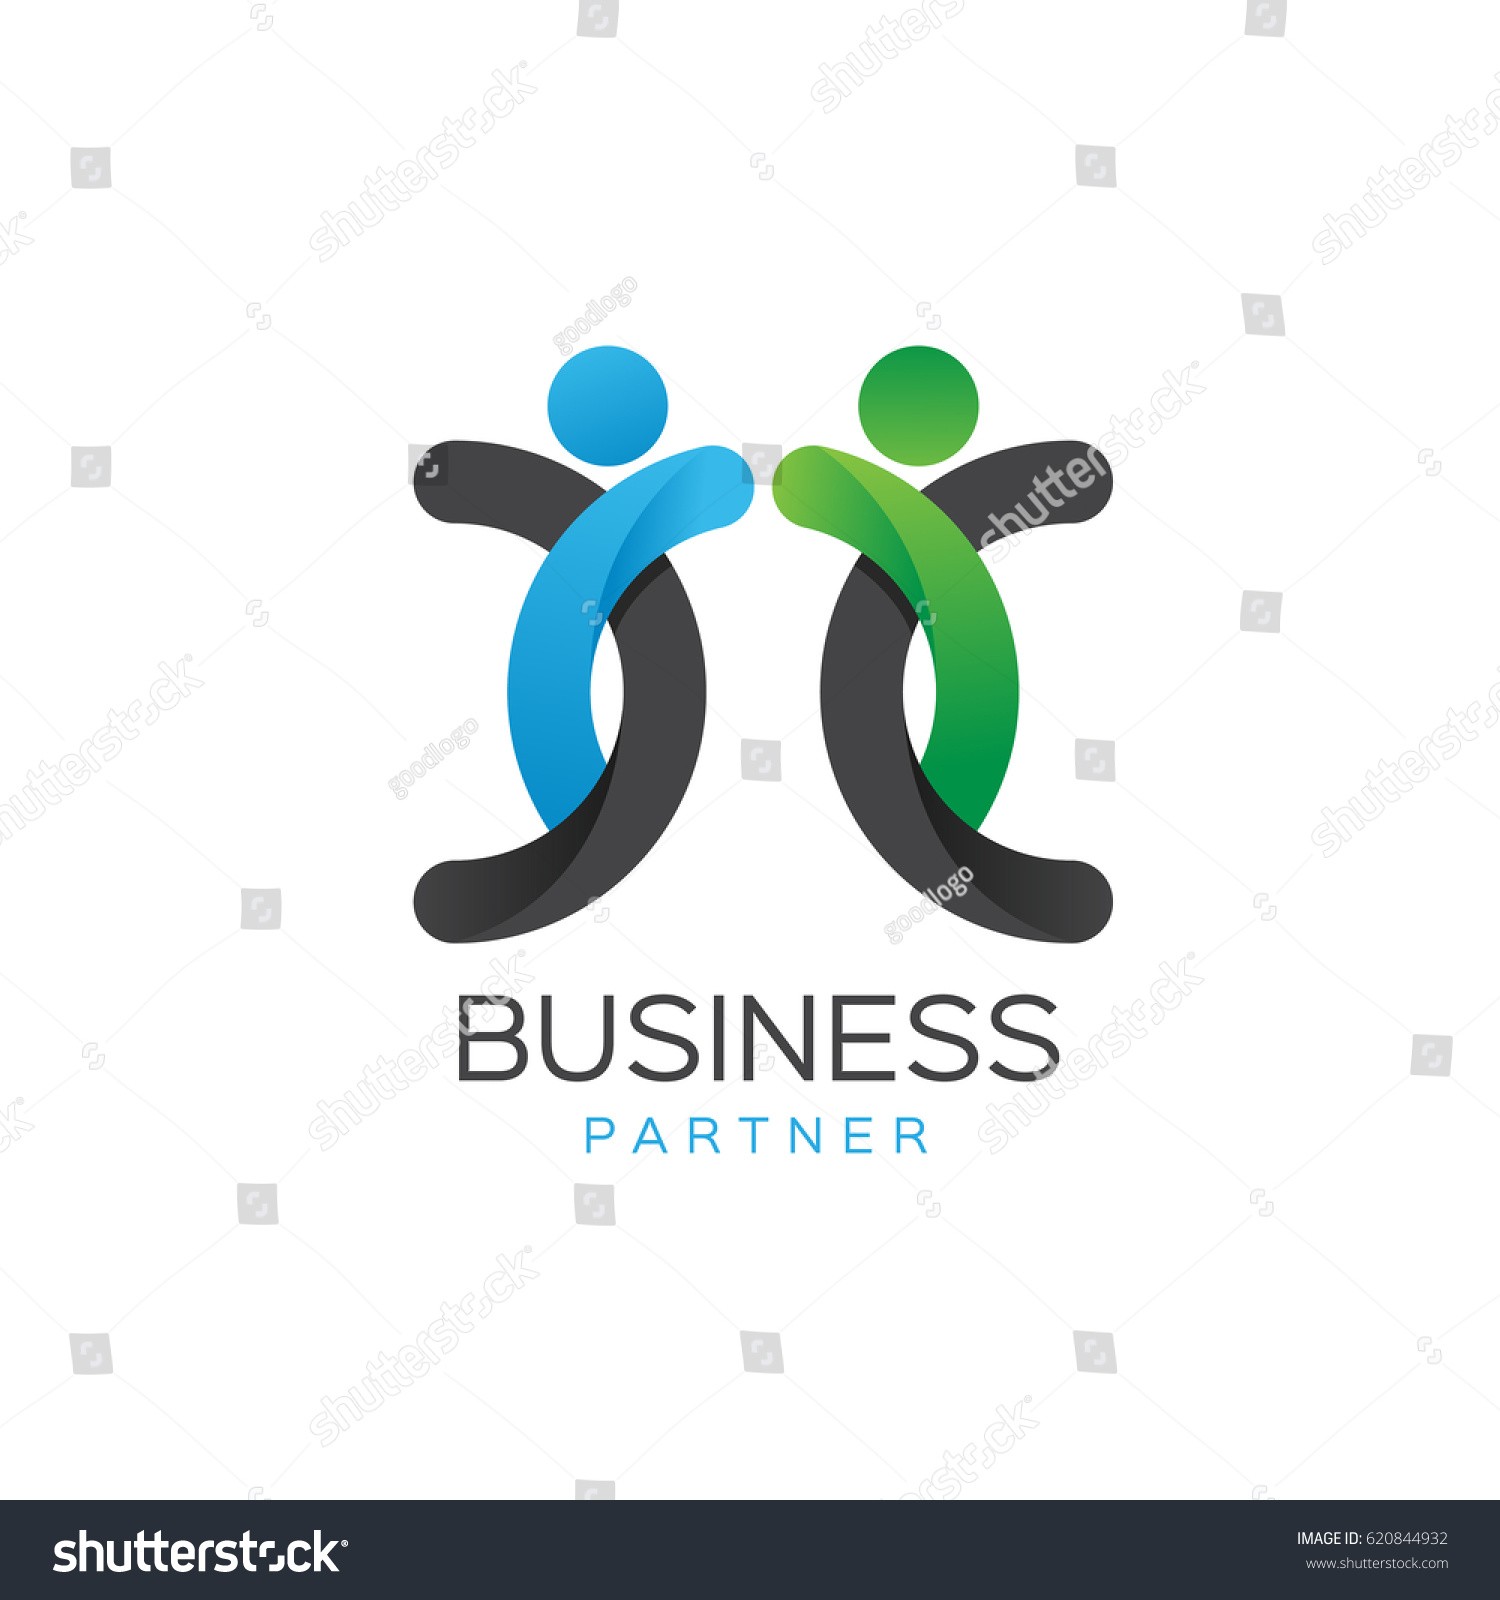 Wanted partner for business